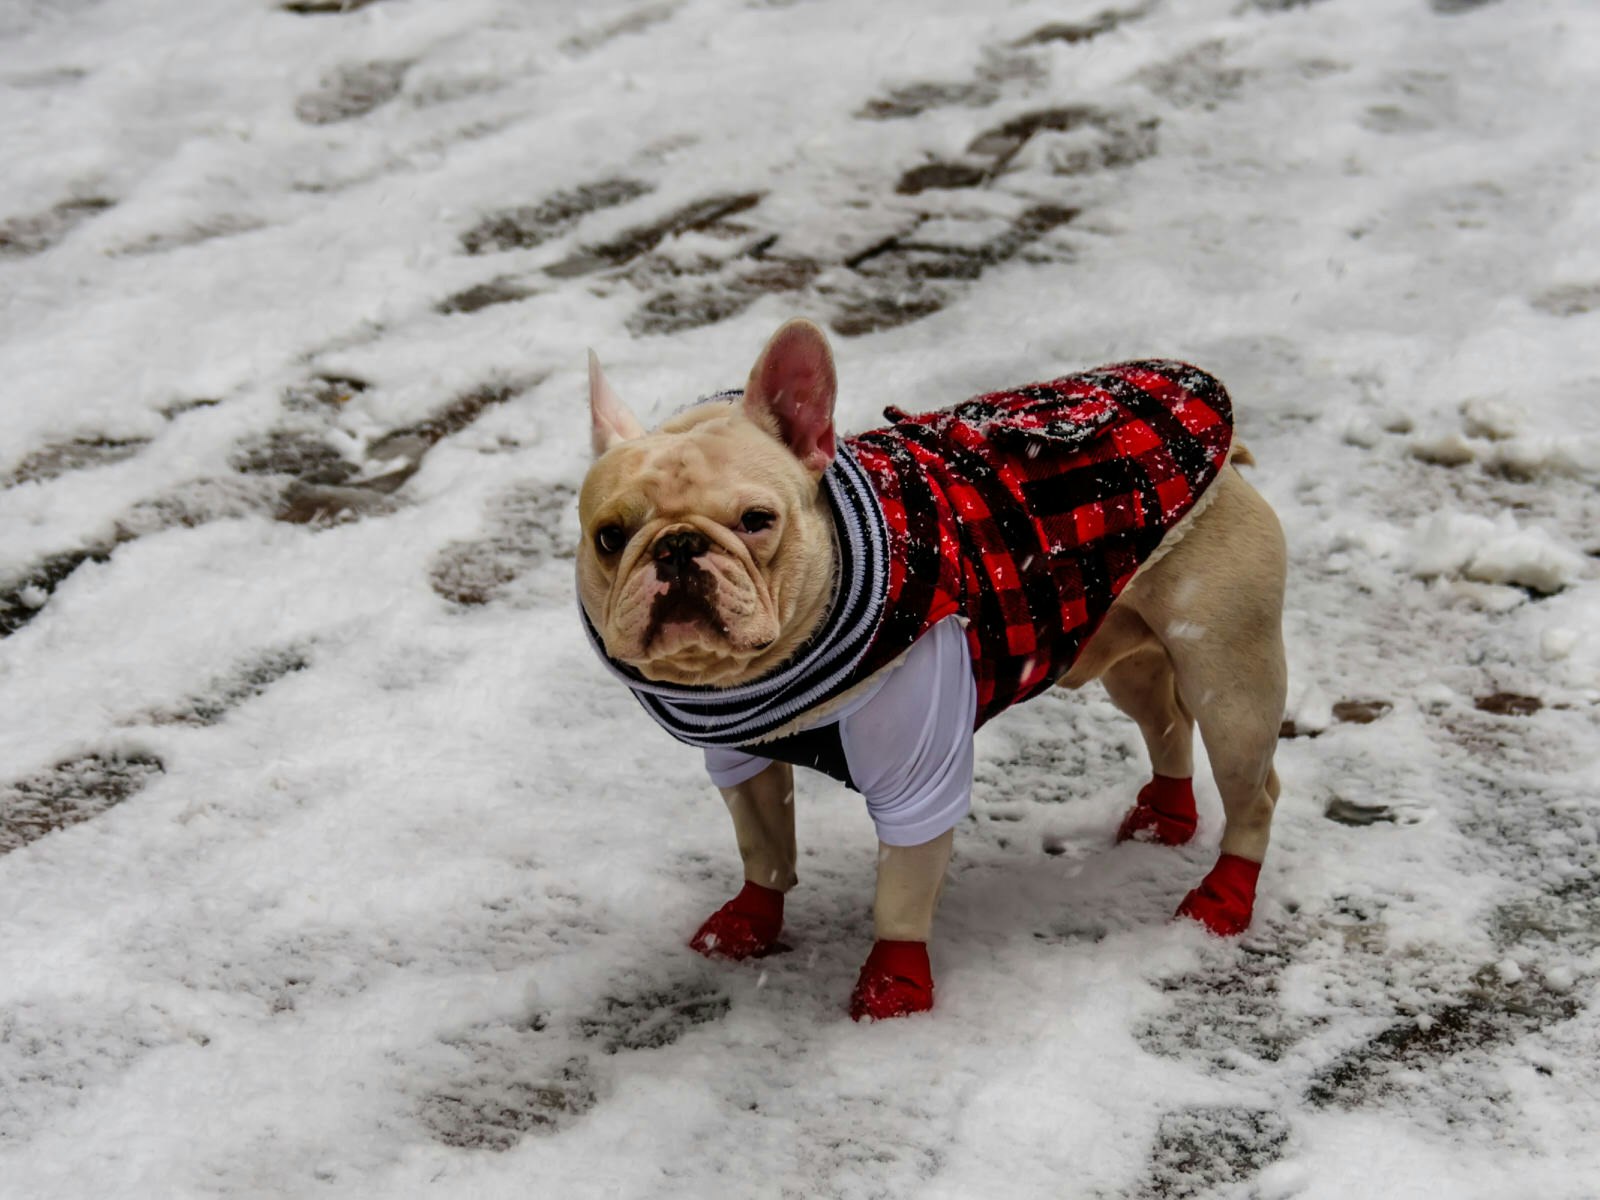 A white French bulldog wearing a red and black plaid dog jacket and a set of four red socks, standing in the snow